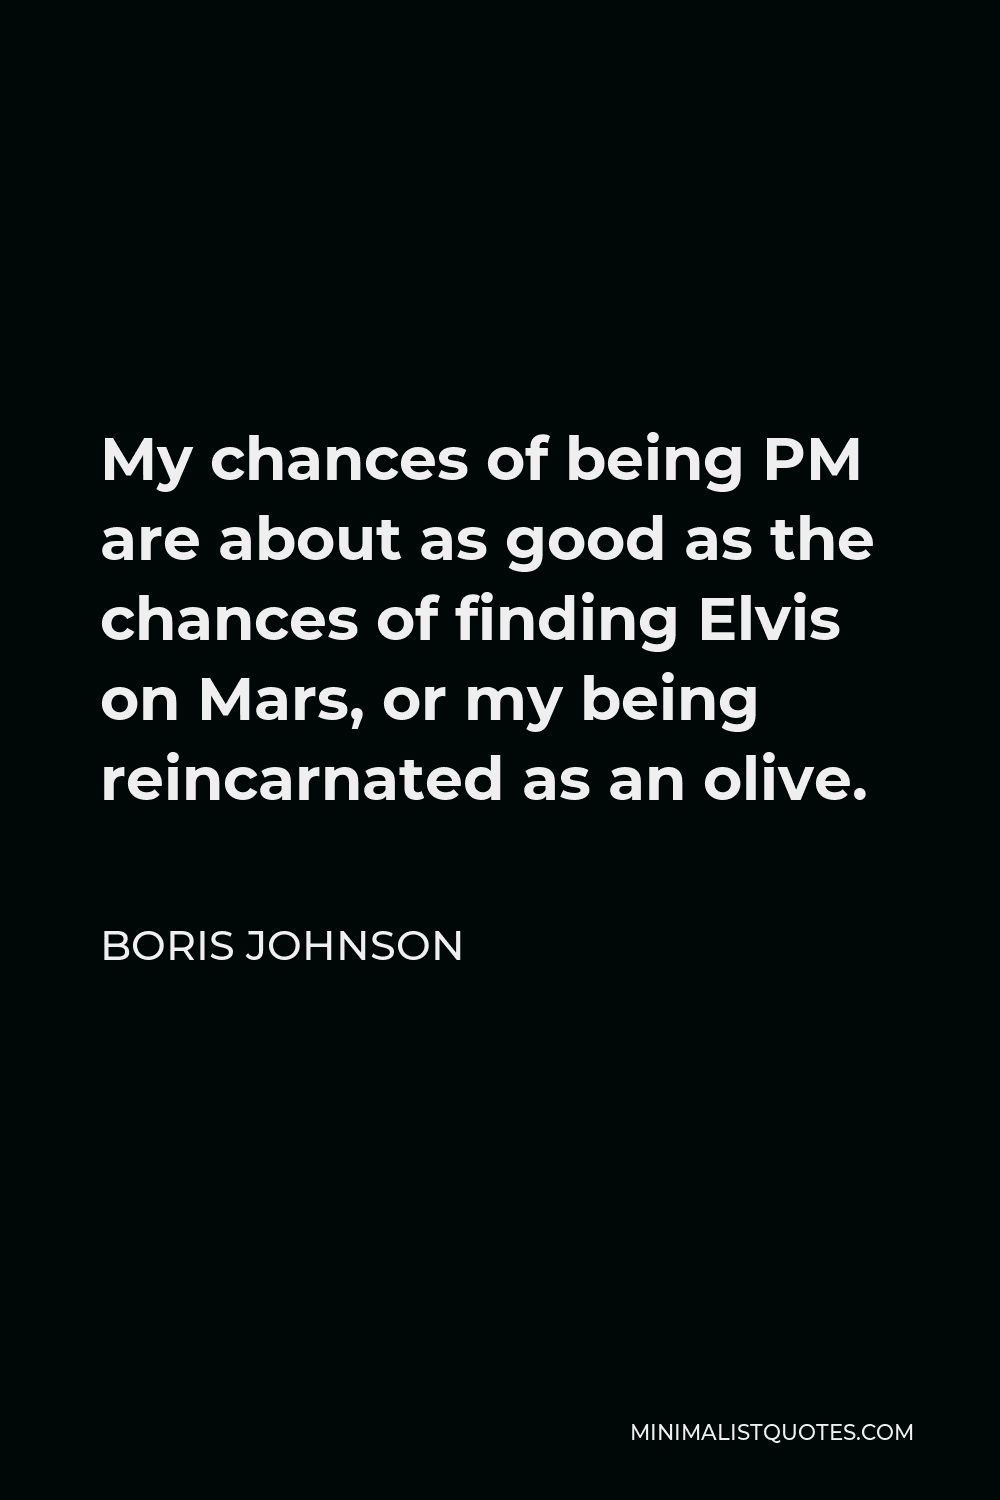 Boris Johnson Quote - My chances of being PM are about as good as the chances of finding Elvis on Mars, or my being reincarnated as an olive.